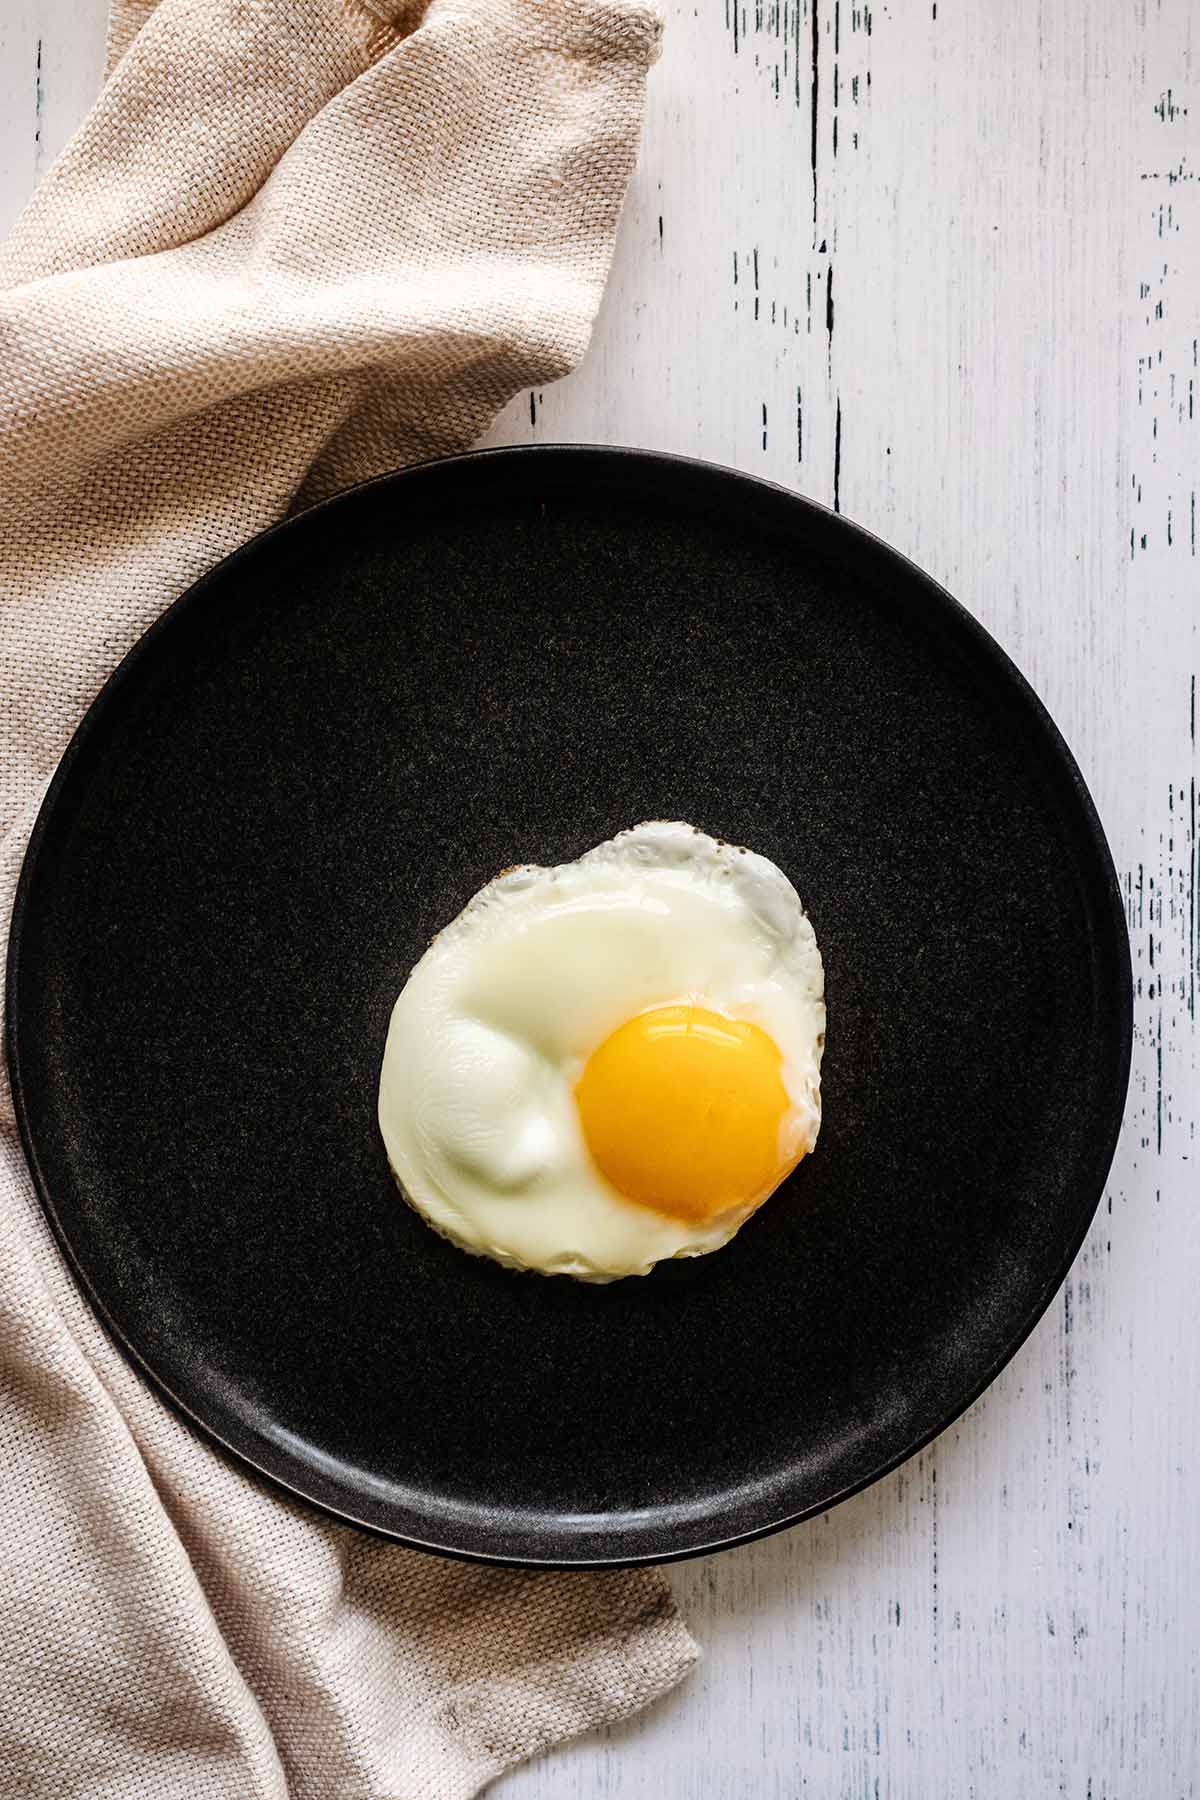 Sunny side up egg on a dark grey plate with a beige napkin.